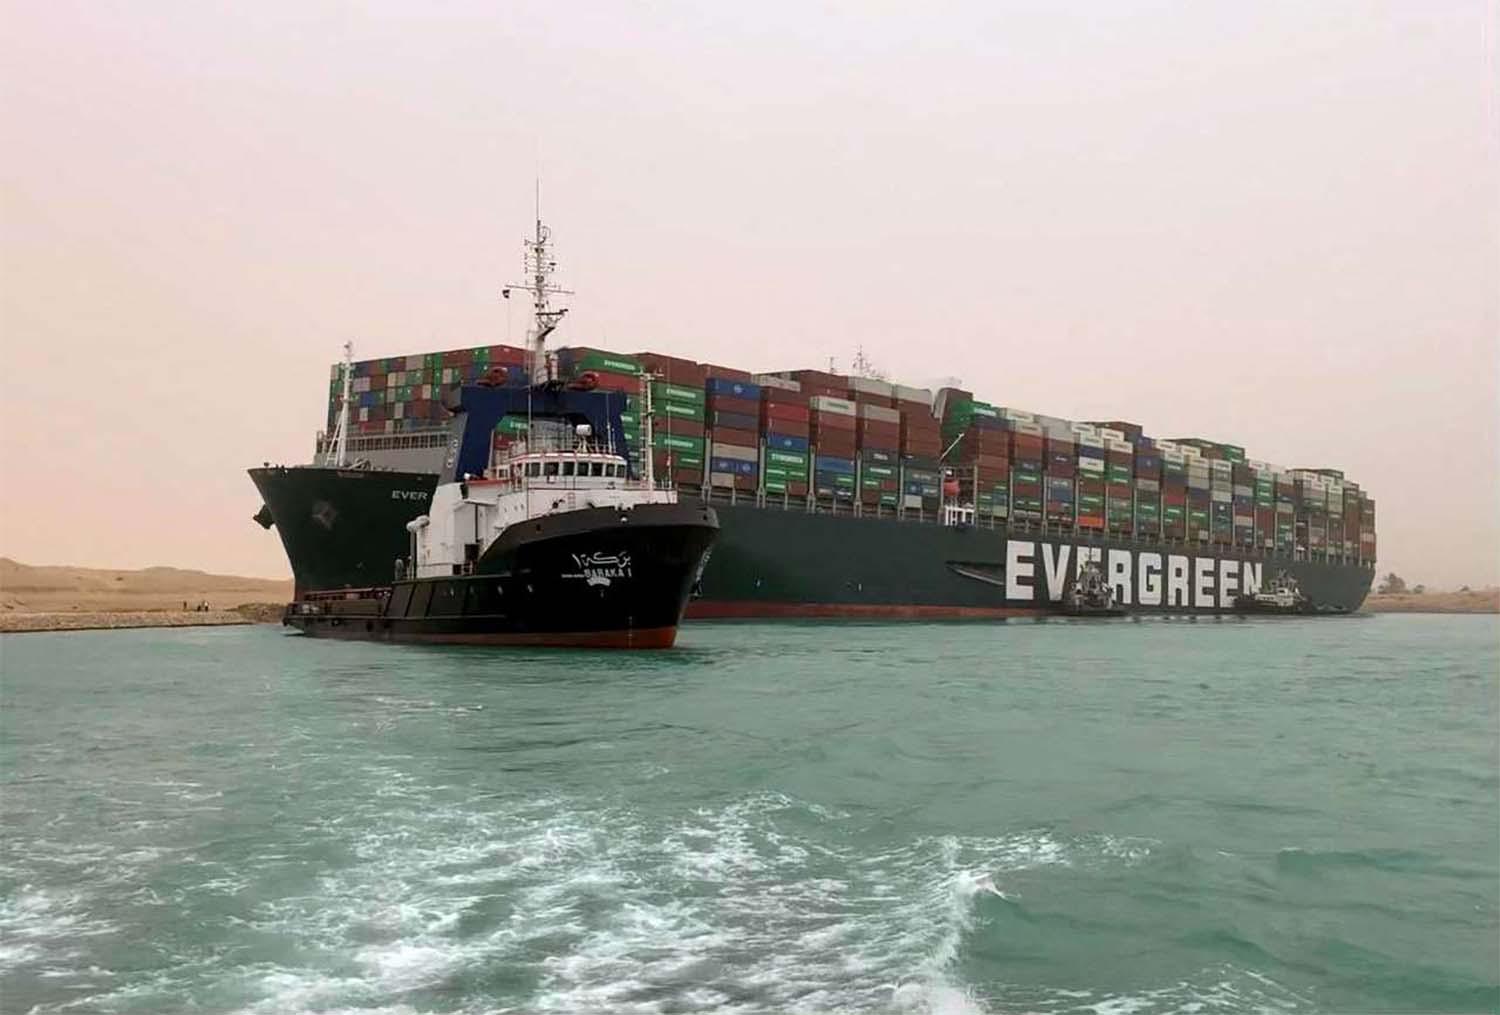 MV Ever Given lodged sideways, impeding all traffic across the waterway of Egypt's Suez Canal